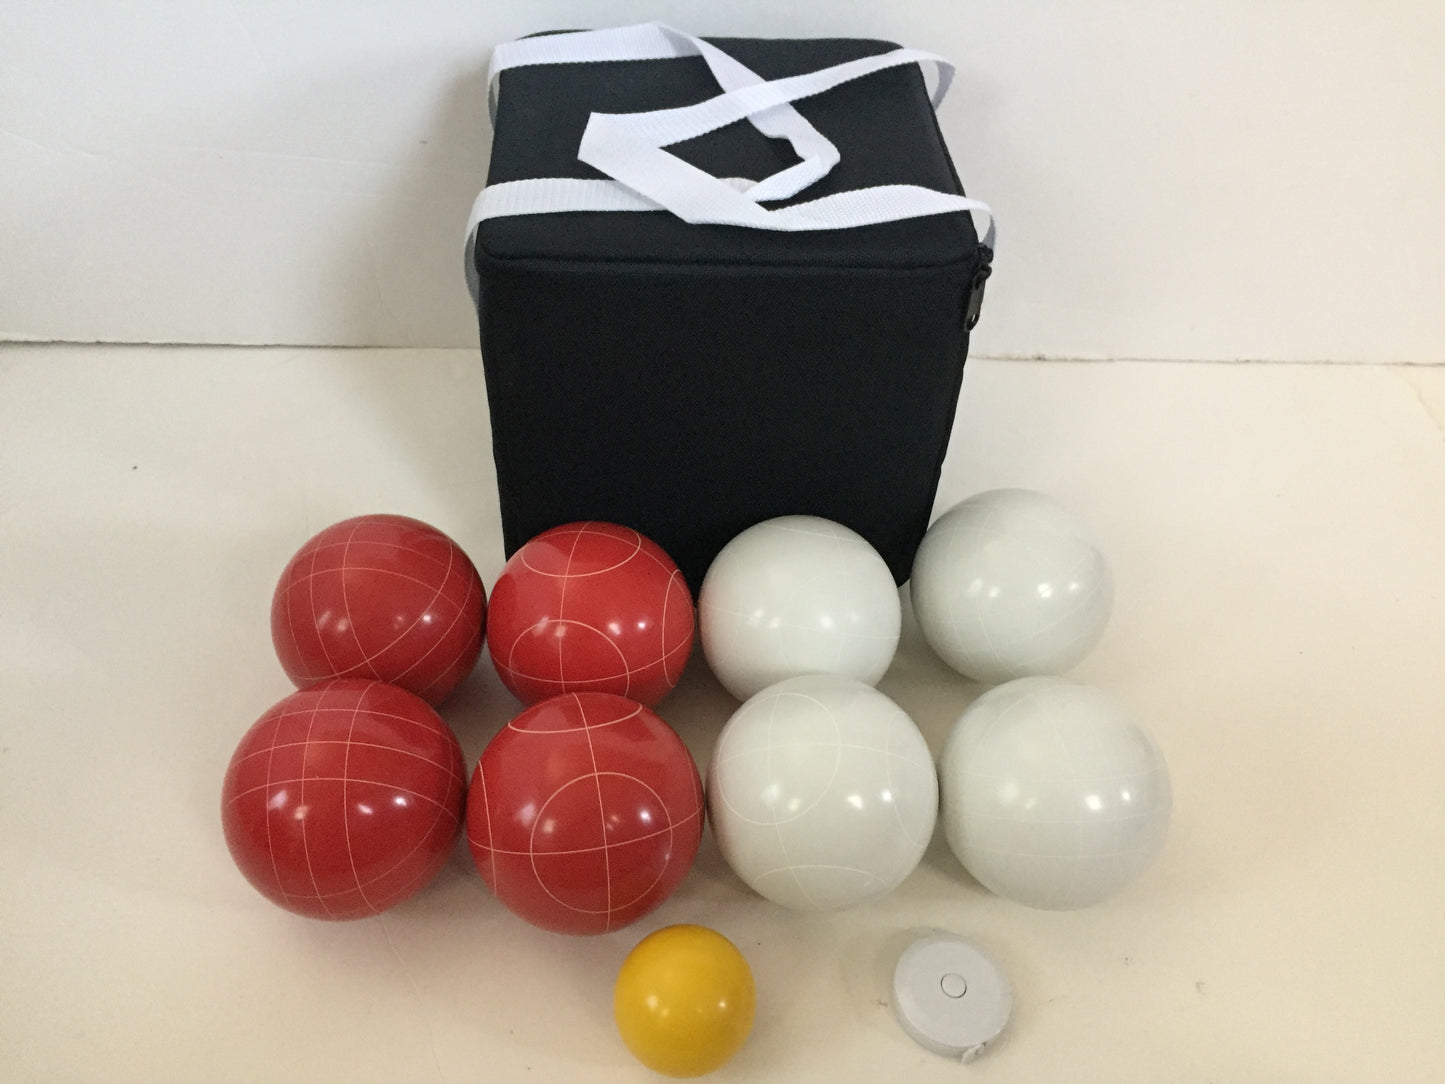 107mm with White and Red Balls with Black Bag